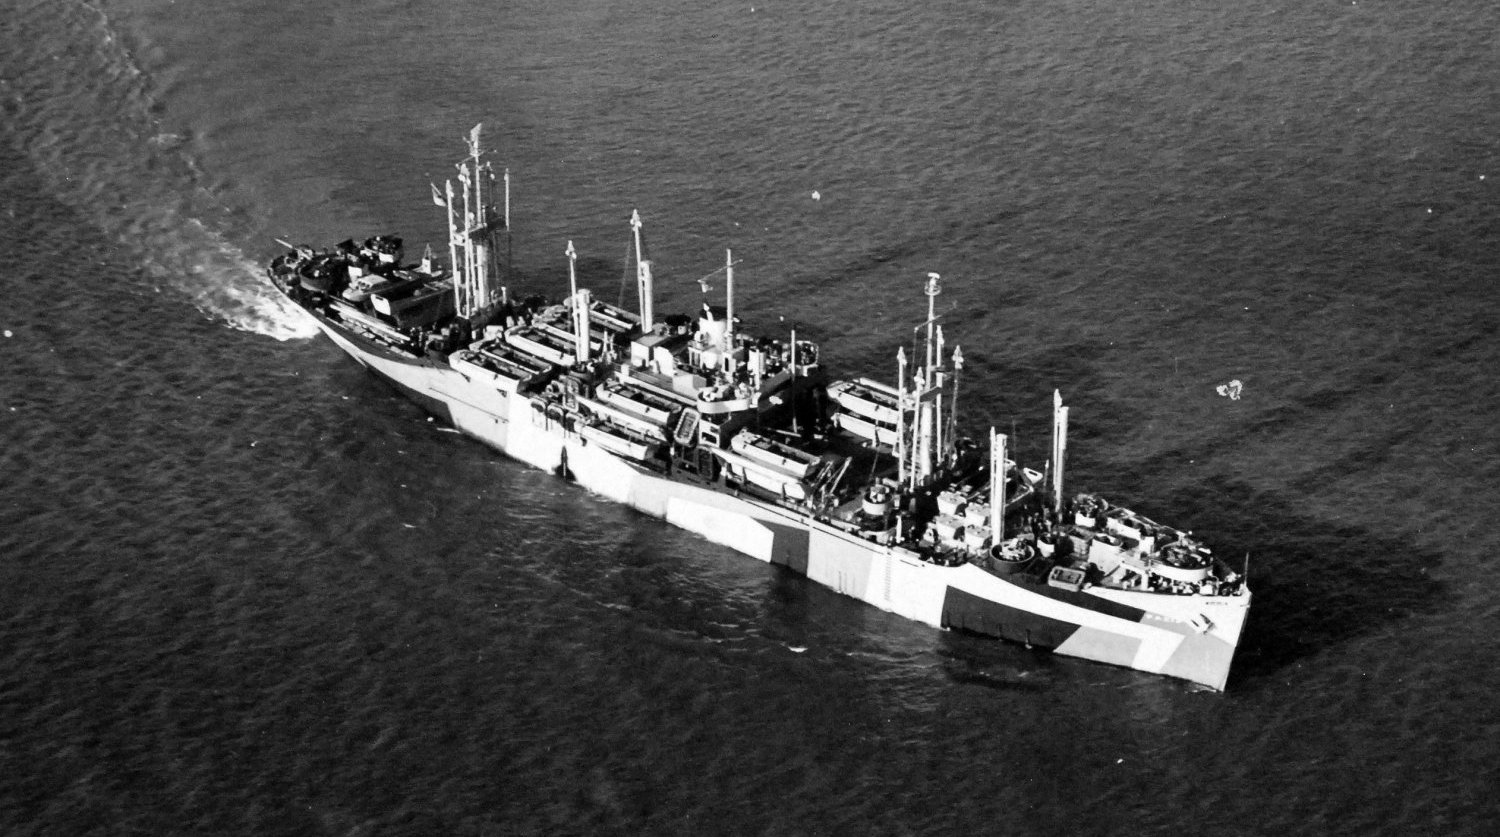 Haskell-class Attack Transport USS Mountrail underway on the west coast of the United States, 5 Dec 1944. Mountrail was built at the Kaiser Richmond Shipyards. Note LCVP landing craft on Mountrail’s deck.